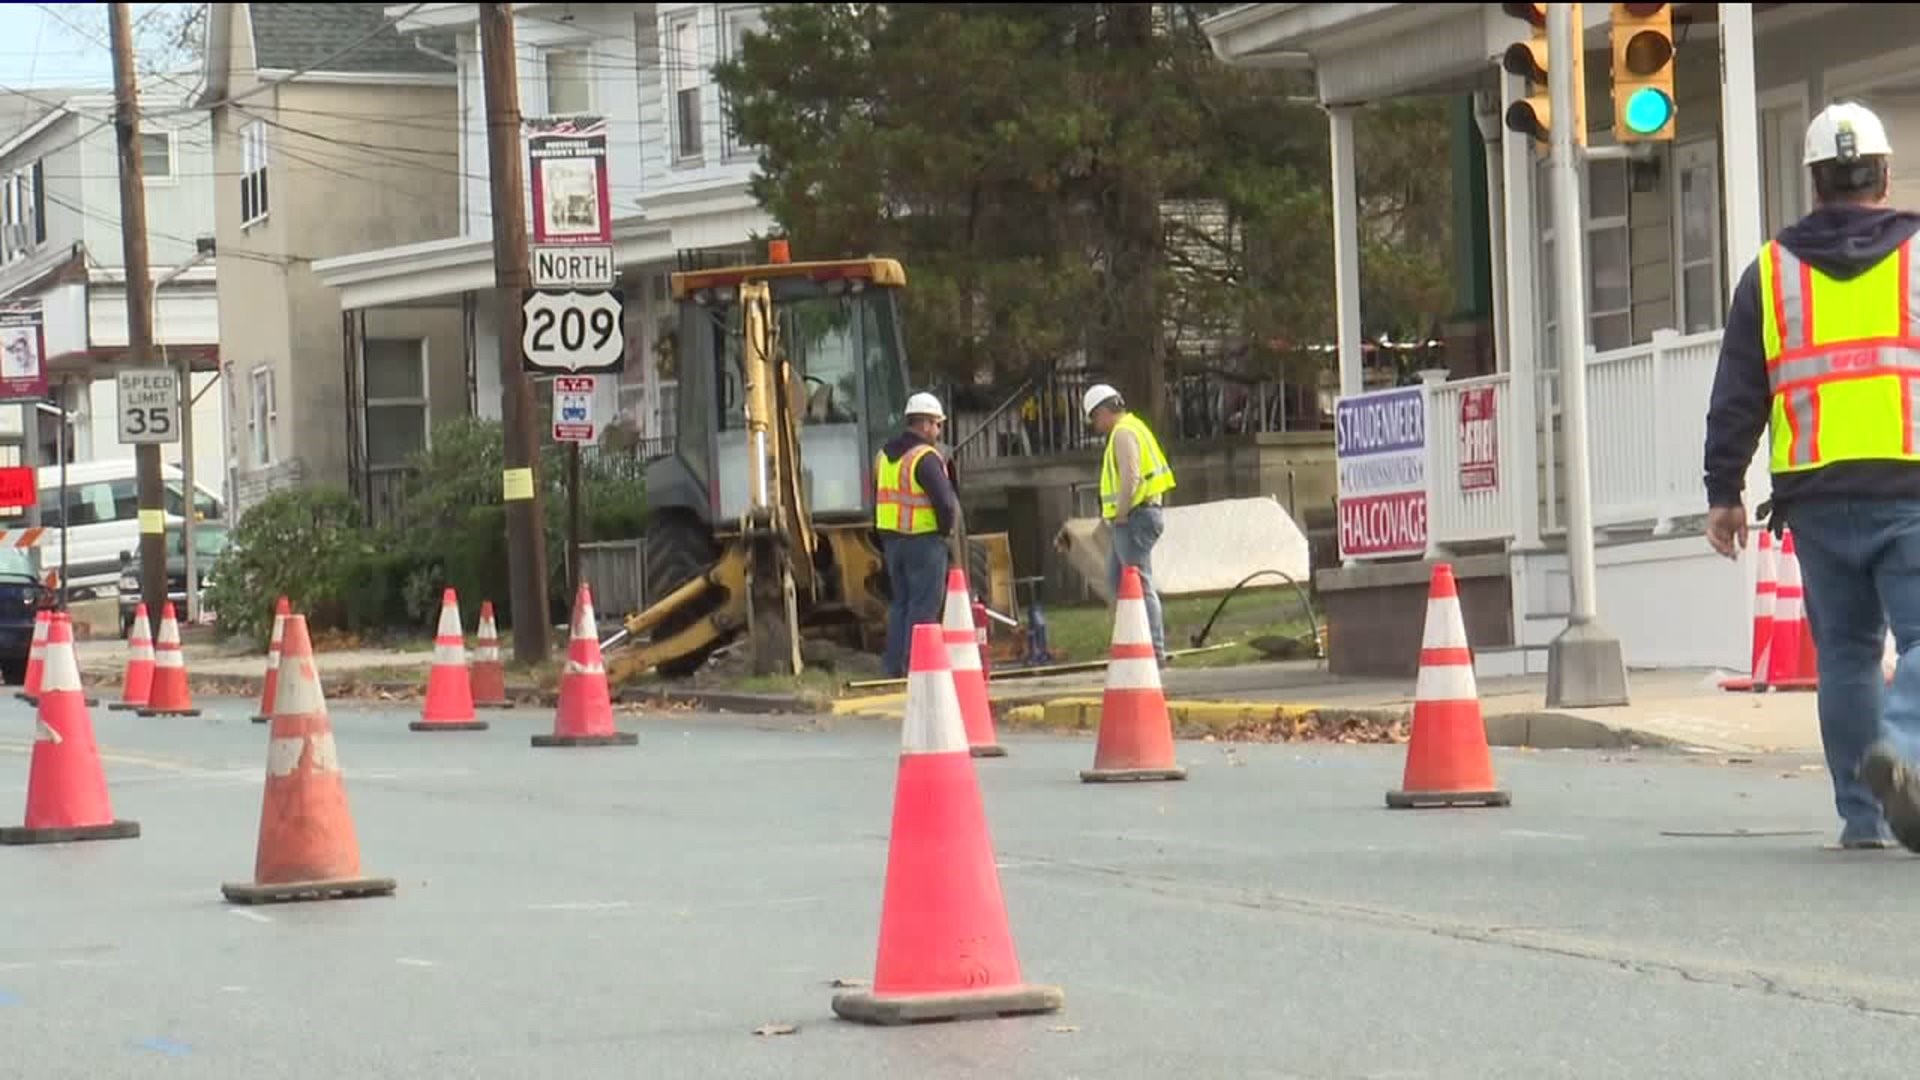 Homes, Businesses Evacuated After Gas Leak in Pottsville